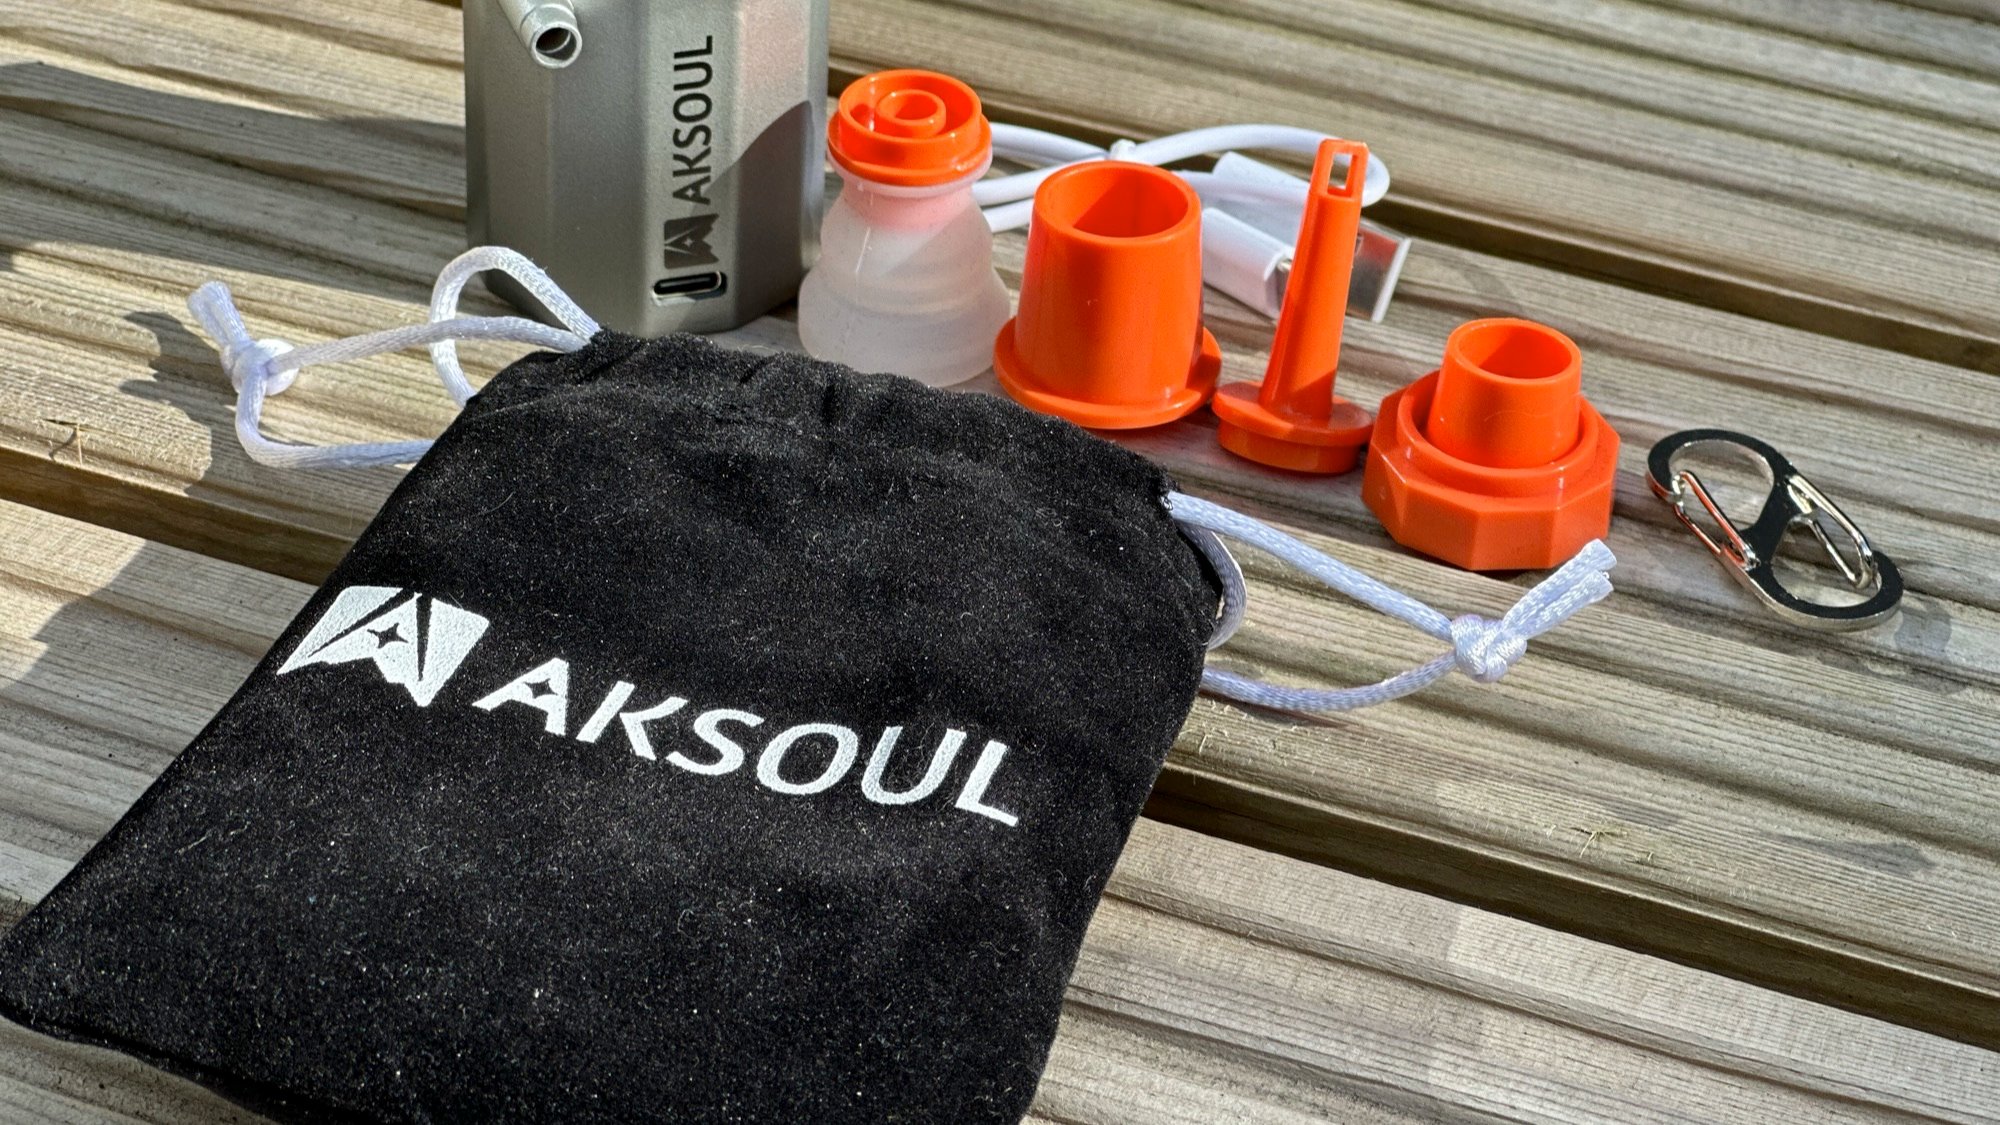 The AKSOUL bag with pump and accessories